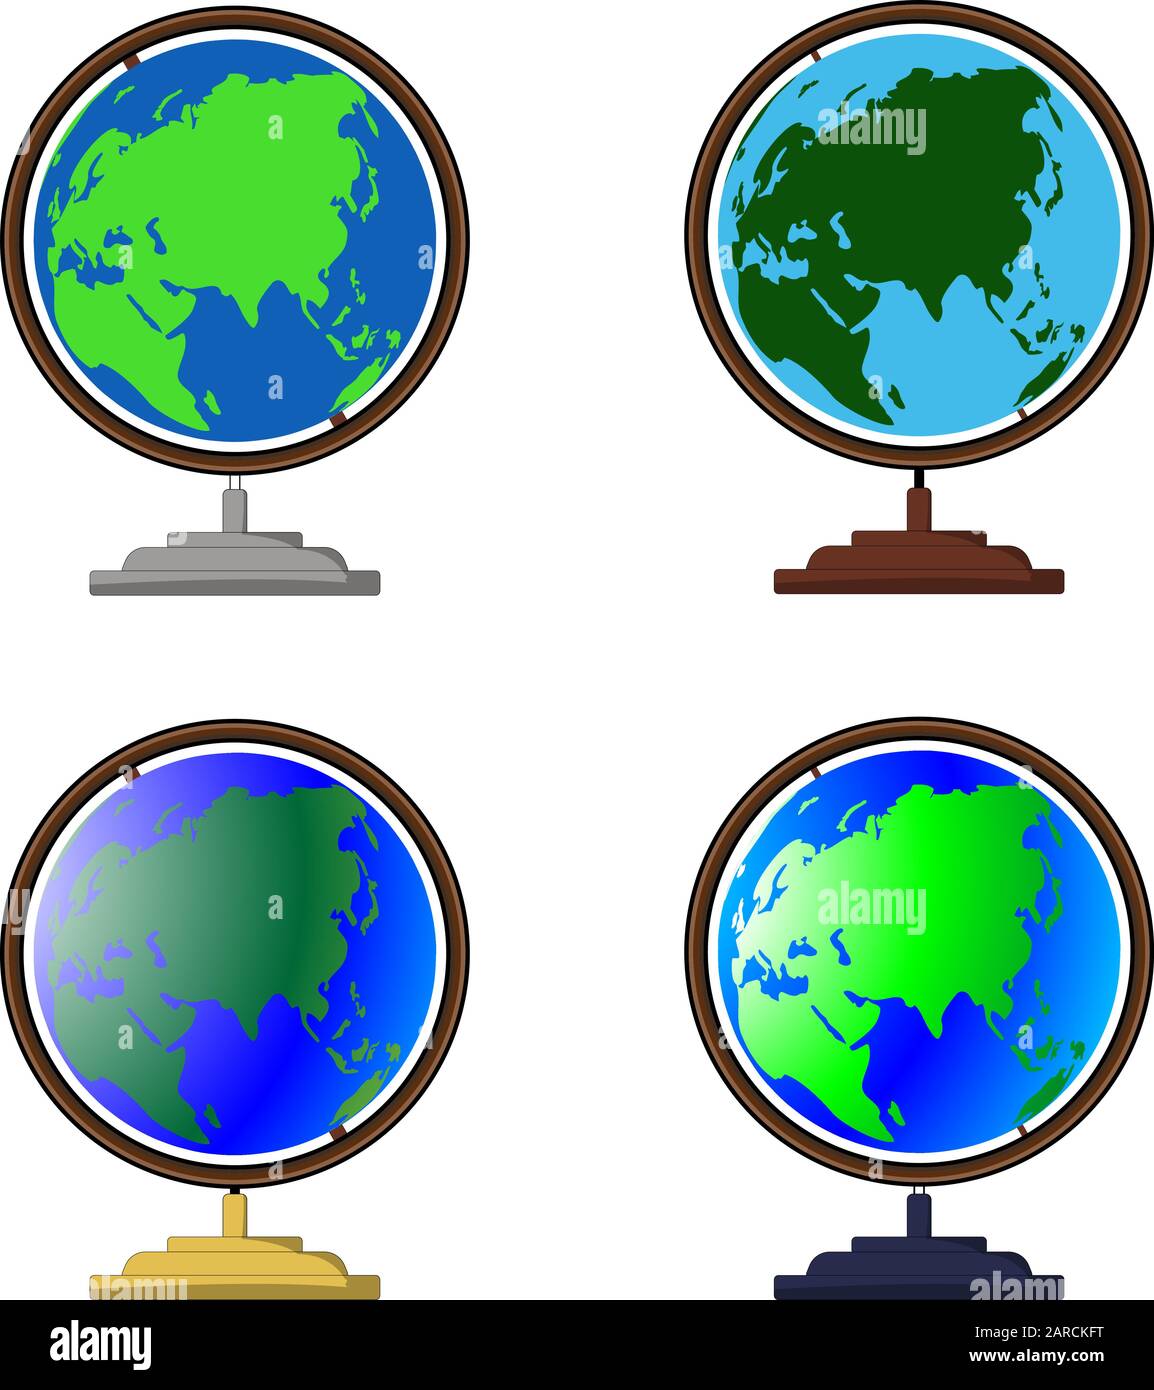 Vector globe icons of the world. Set of desktop globes withstand, various colors and shades. Globe props for cartoon and animation decor. Stock Vector